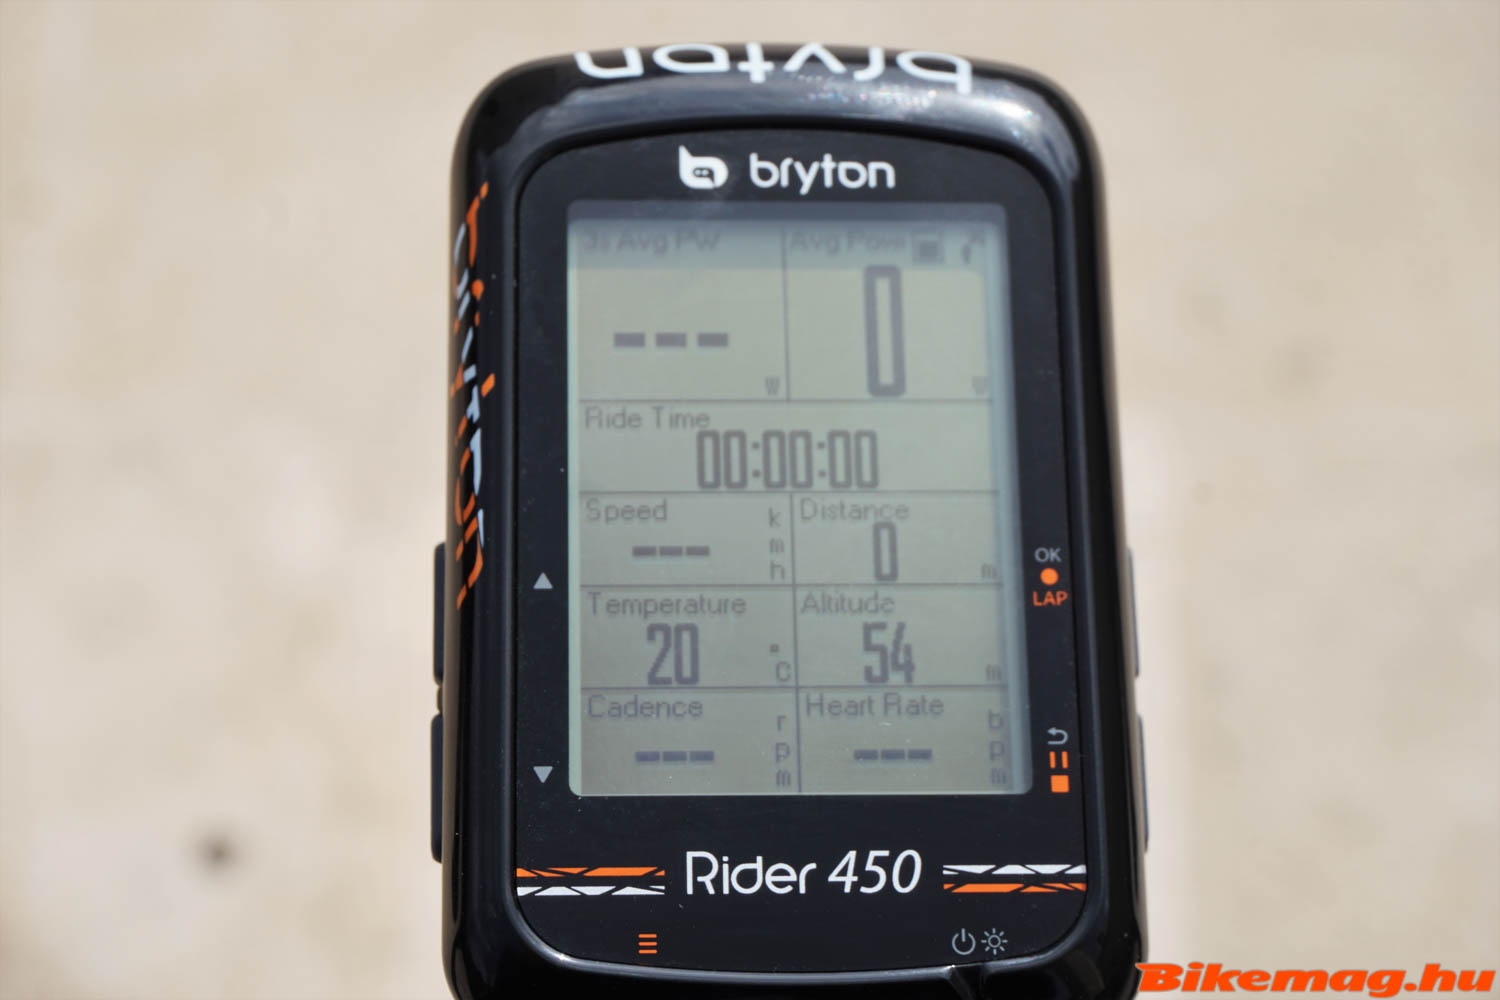 Bryton Rider 450 GPS computer review: Unsurpassed value 